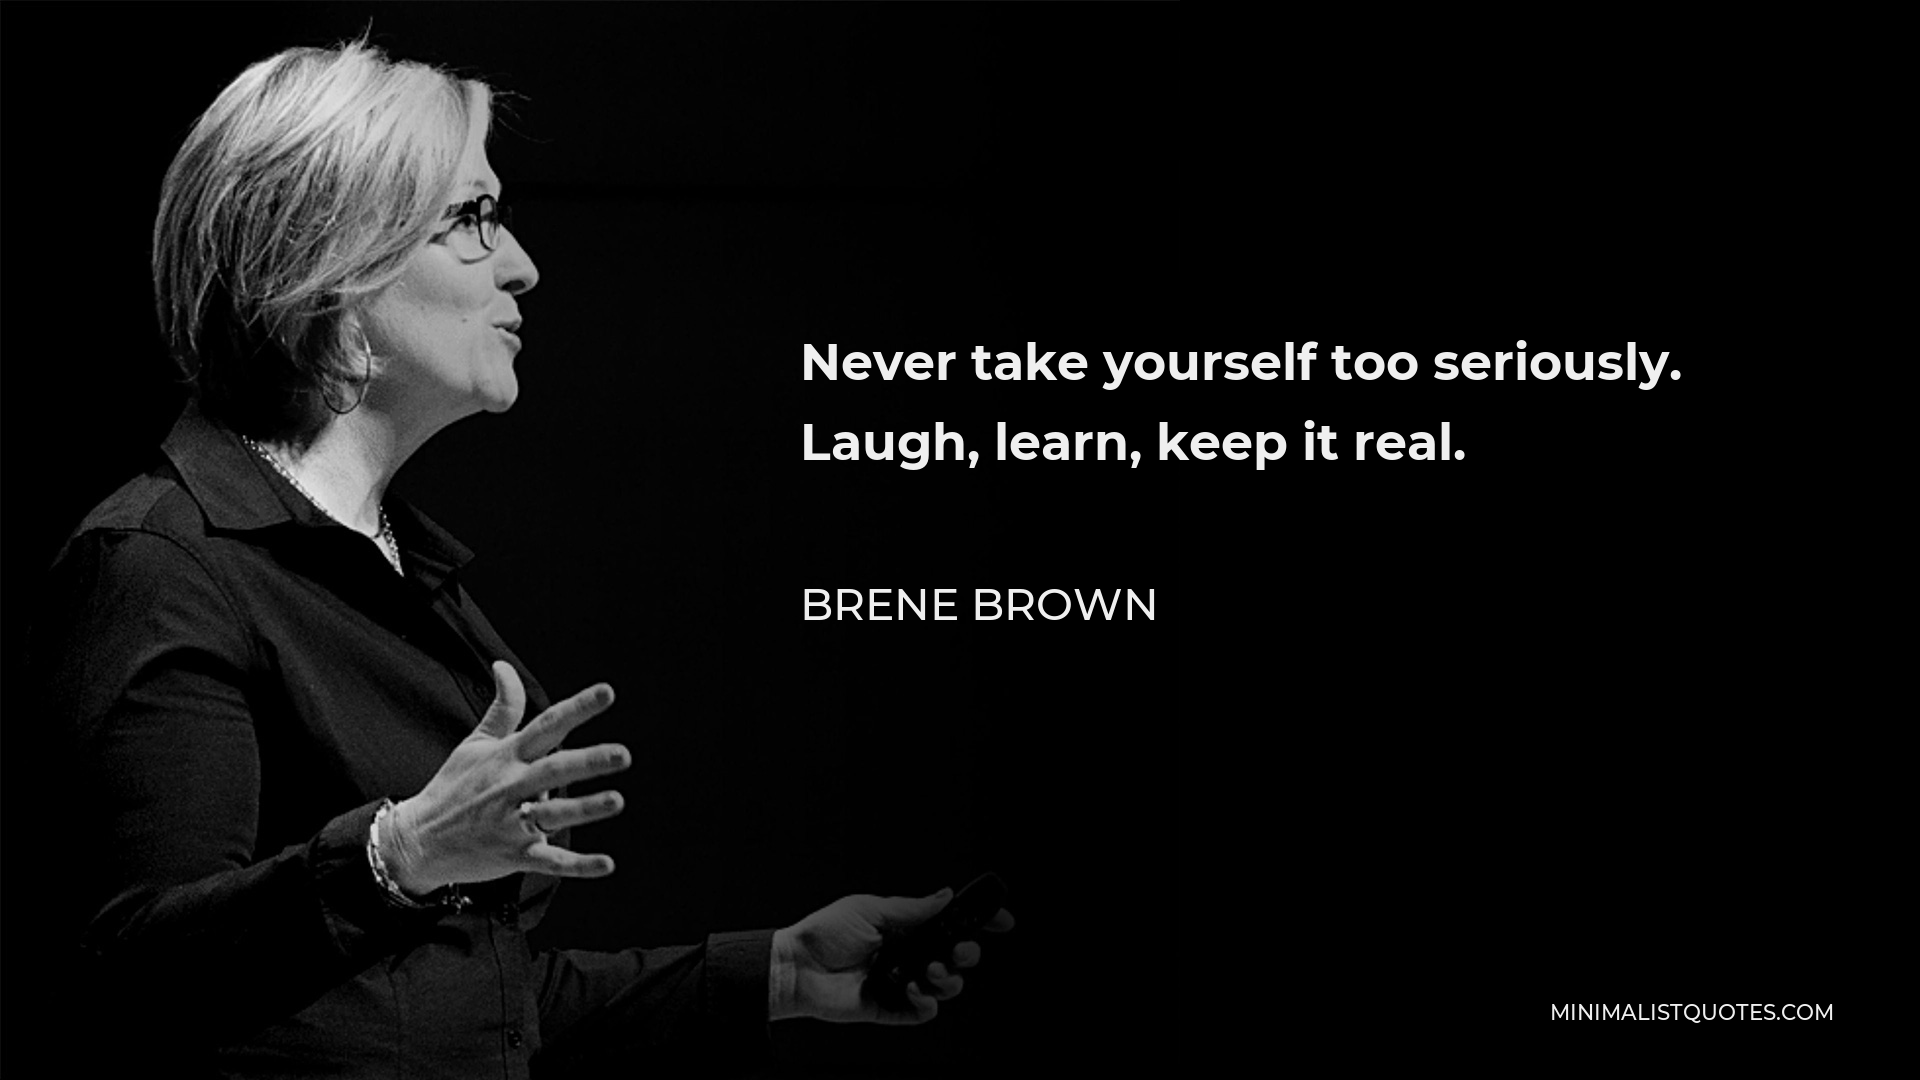 Brene Brown Quote - Never take yourself too seriously. Laugh, learn, keep it real.